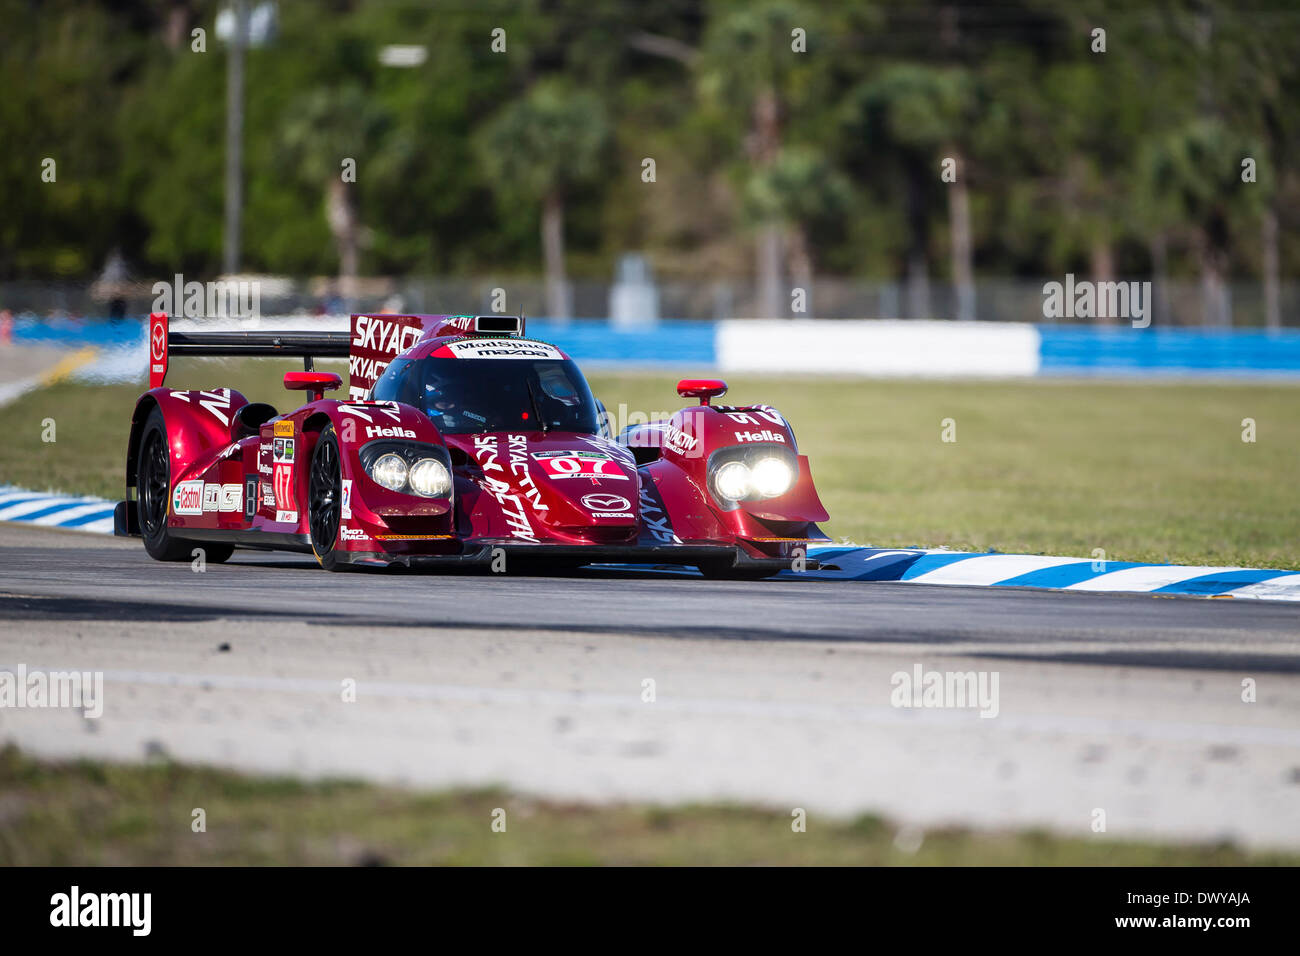 Sebring, FL, USA. 14th Mar, 2014. Sebring, FL - Mar 14, 2014: The Speedsource Mazda takes to the track on Continental tires for a practice session for the 12 Hours of Sebring at Sebring International Raceway in Sebring, FL. Credit:  csm/Alamy Live News Stock Photo